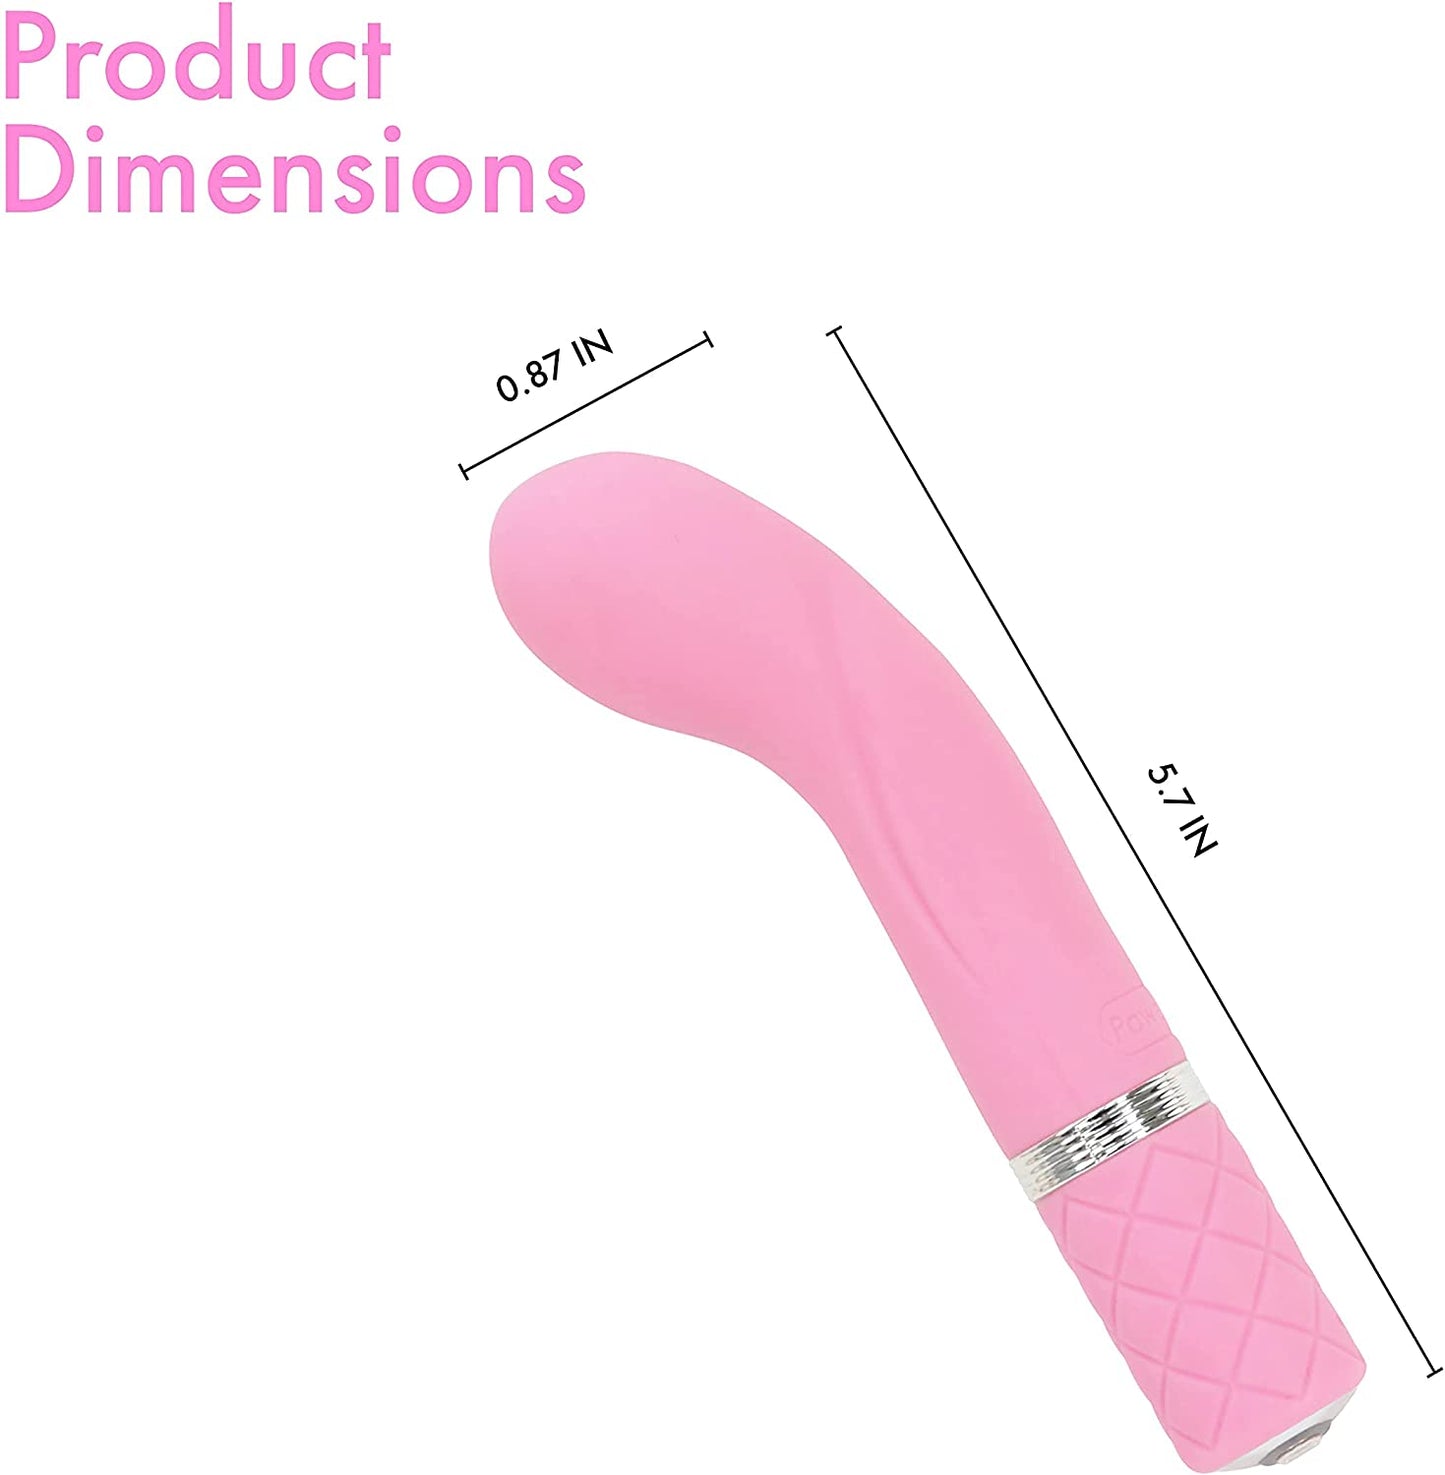 Racy by Pillow Talk offers unbelievable vibrations for external pleasure or G-spot stimulation. This mini vibrator is rechargeable and is conveniently compact for travel. With a quilted texture handle, silky finish and a dazzling Swarovski® crystal button, this flexible vibrator combines luxury and power in one. 